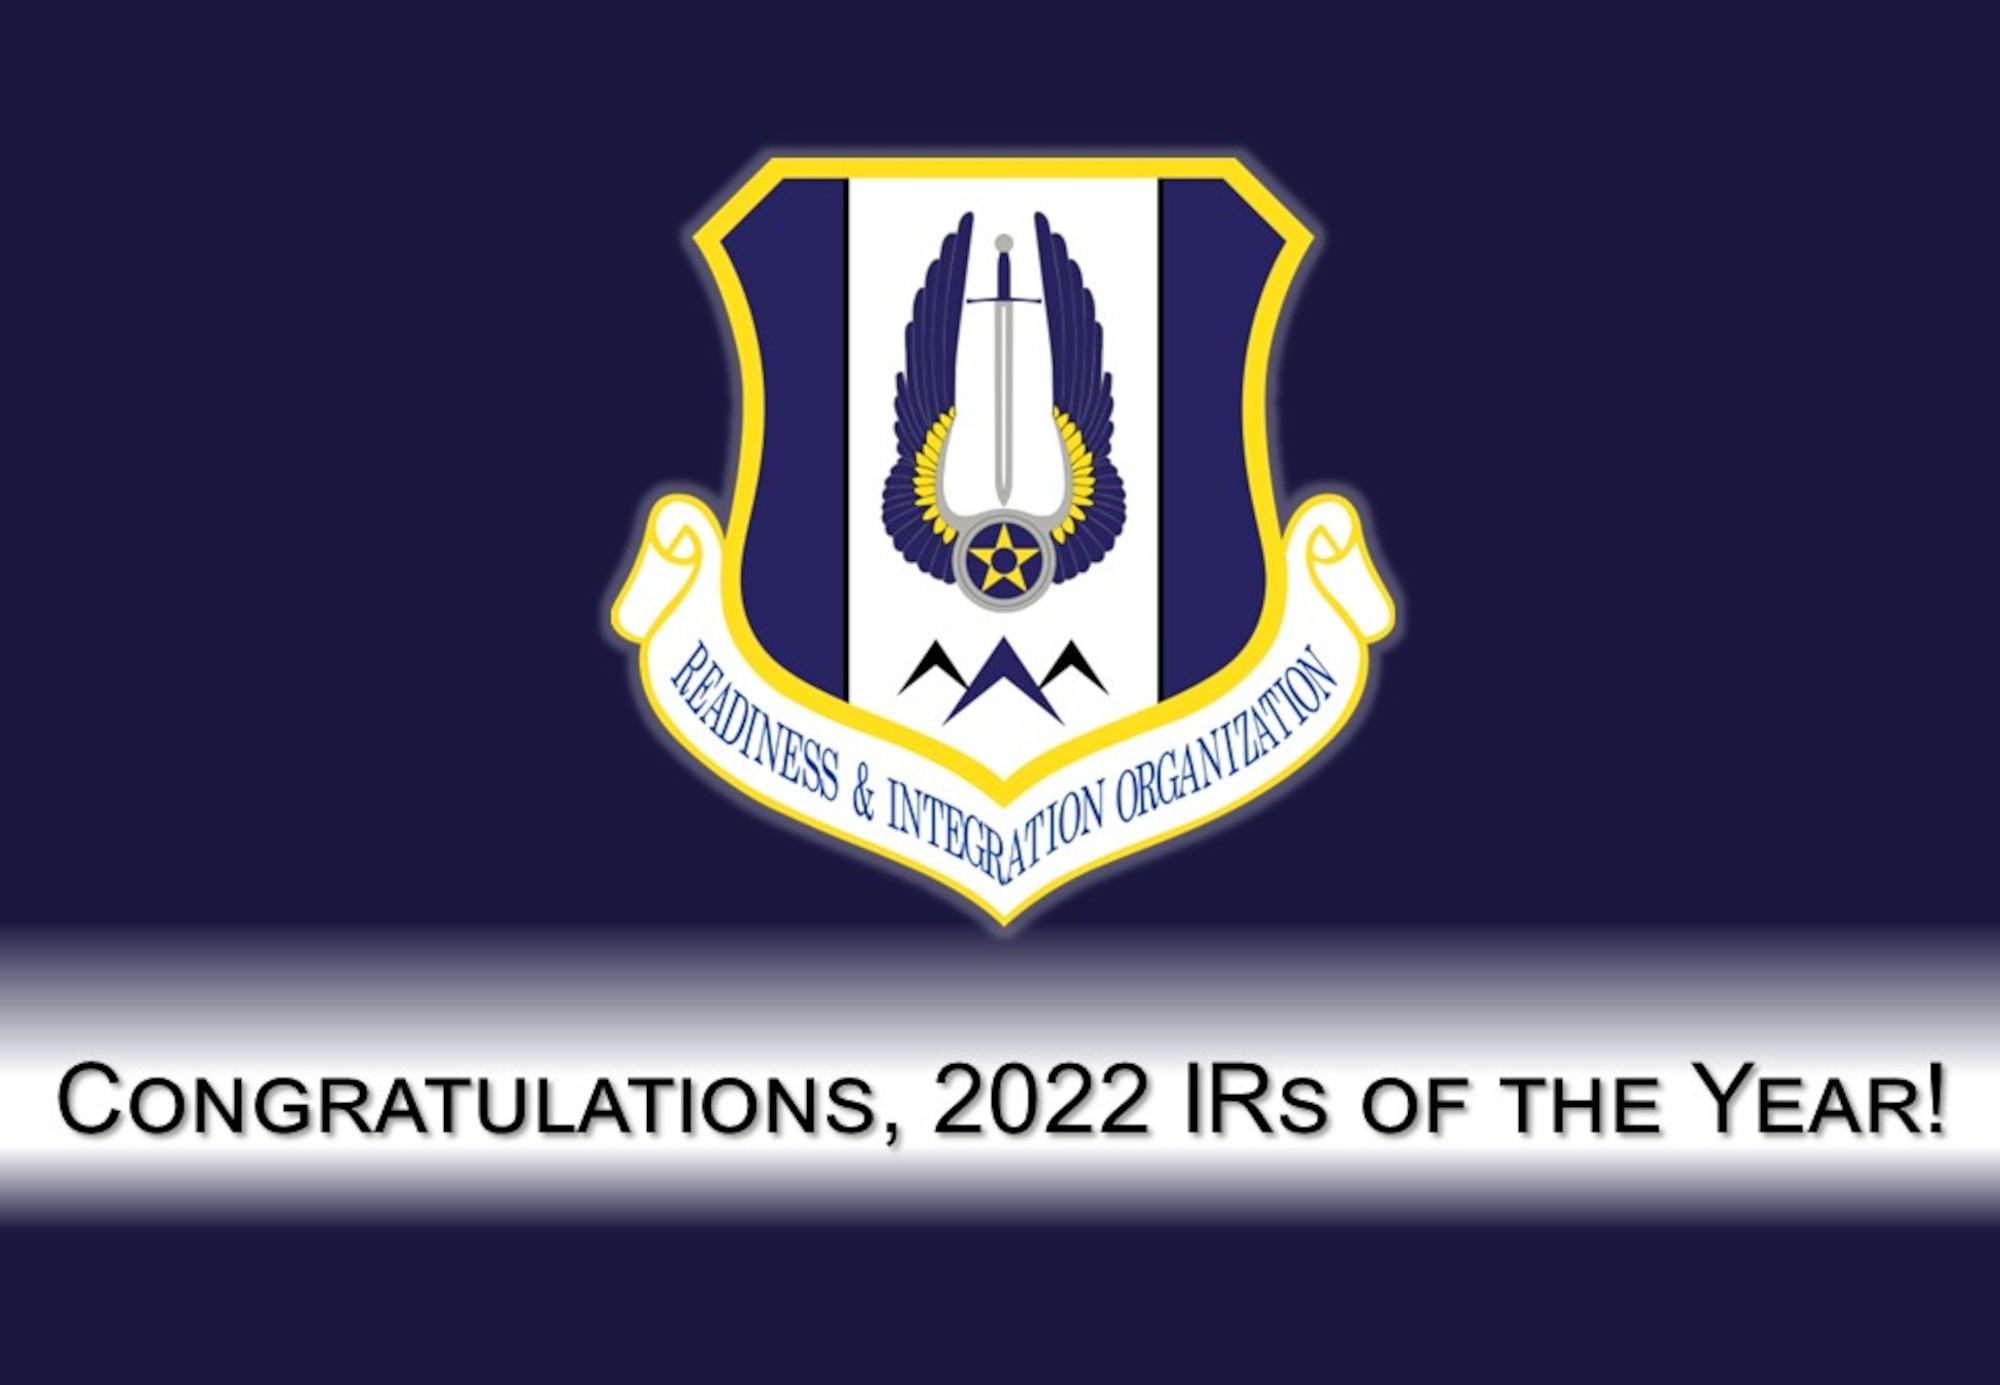 This graphic depicts the Headquarters Readiness and Integration Organization shield and a congratulatory message.